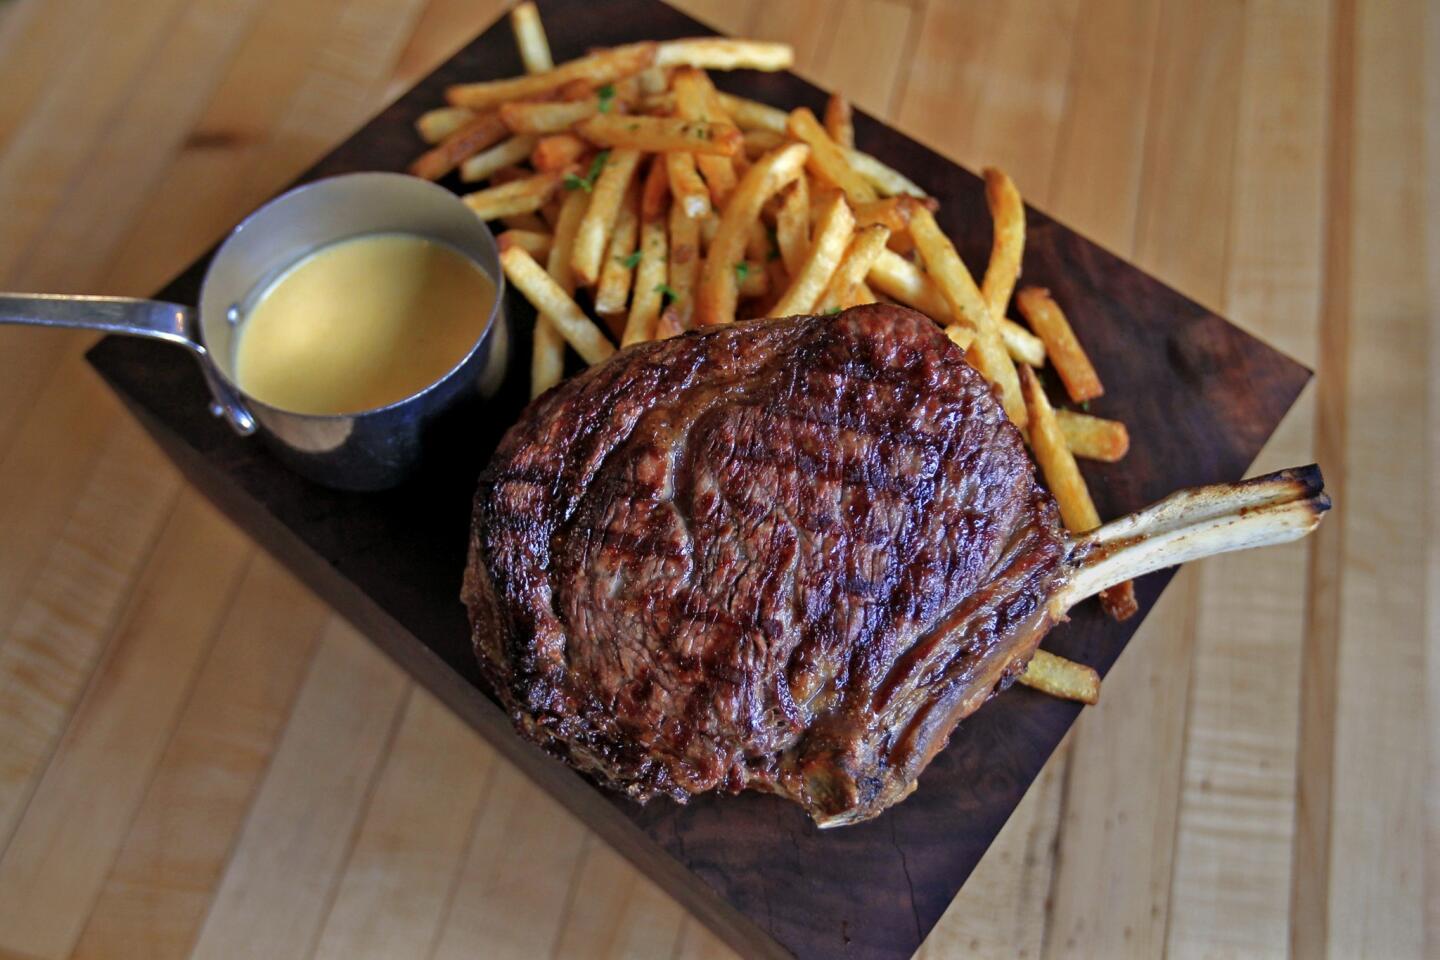 Steak and just about the best fries in Los Angeles are served at République.